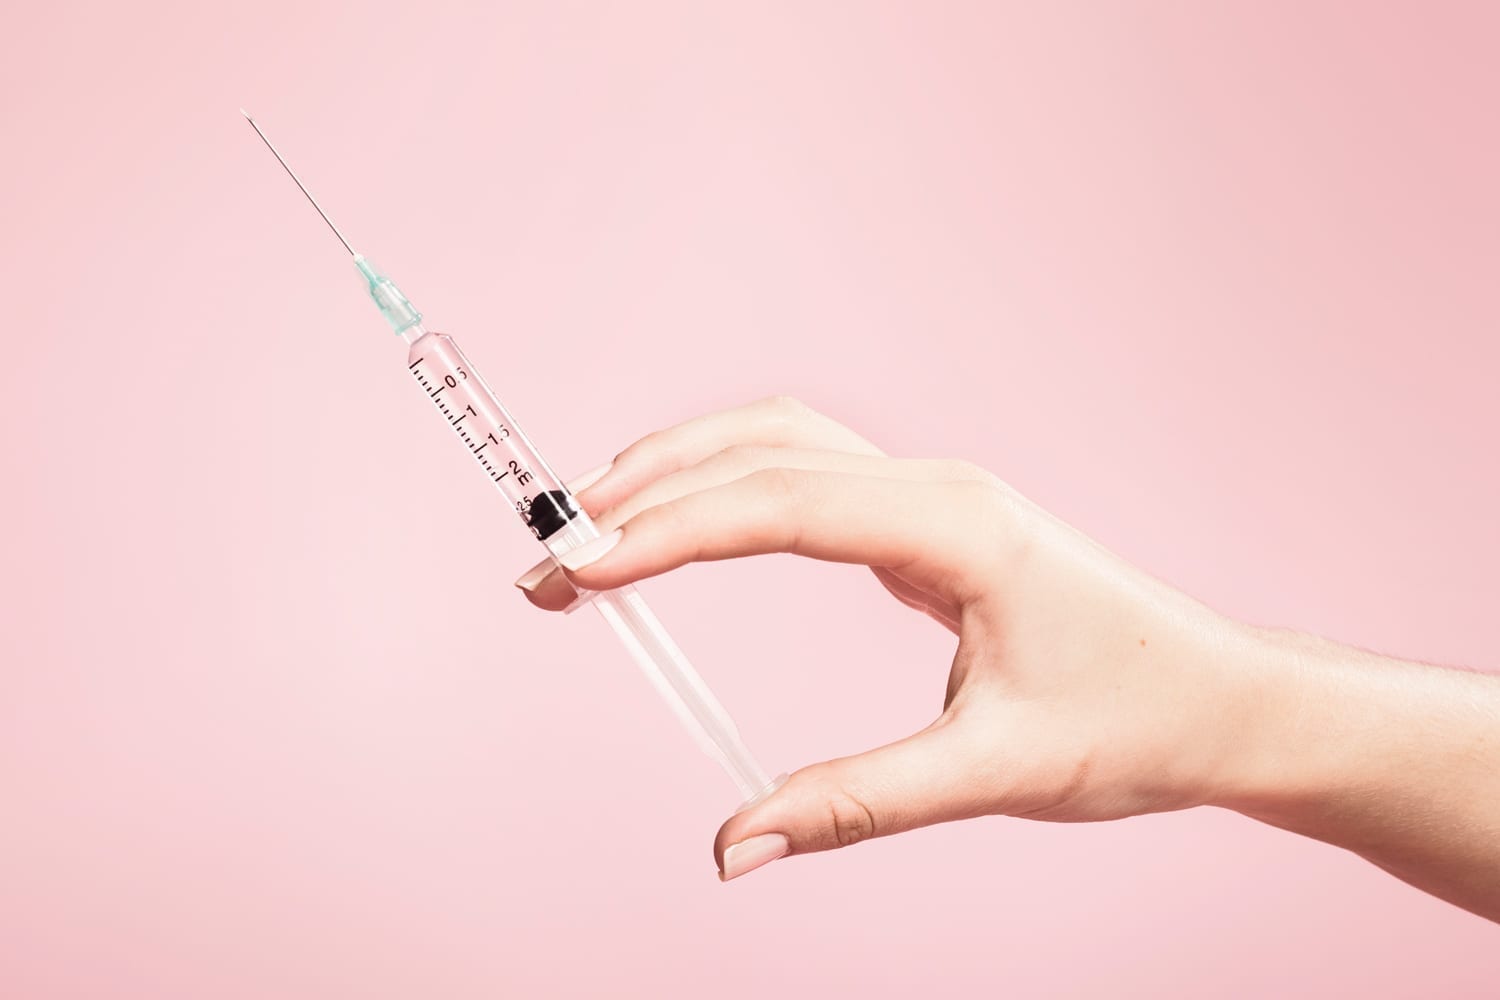 A hand holding a syringe in front of a pink background.